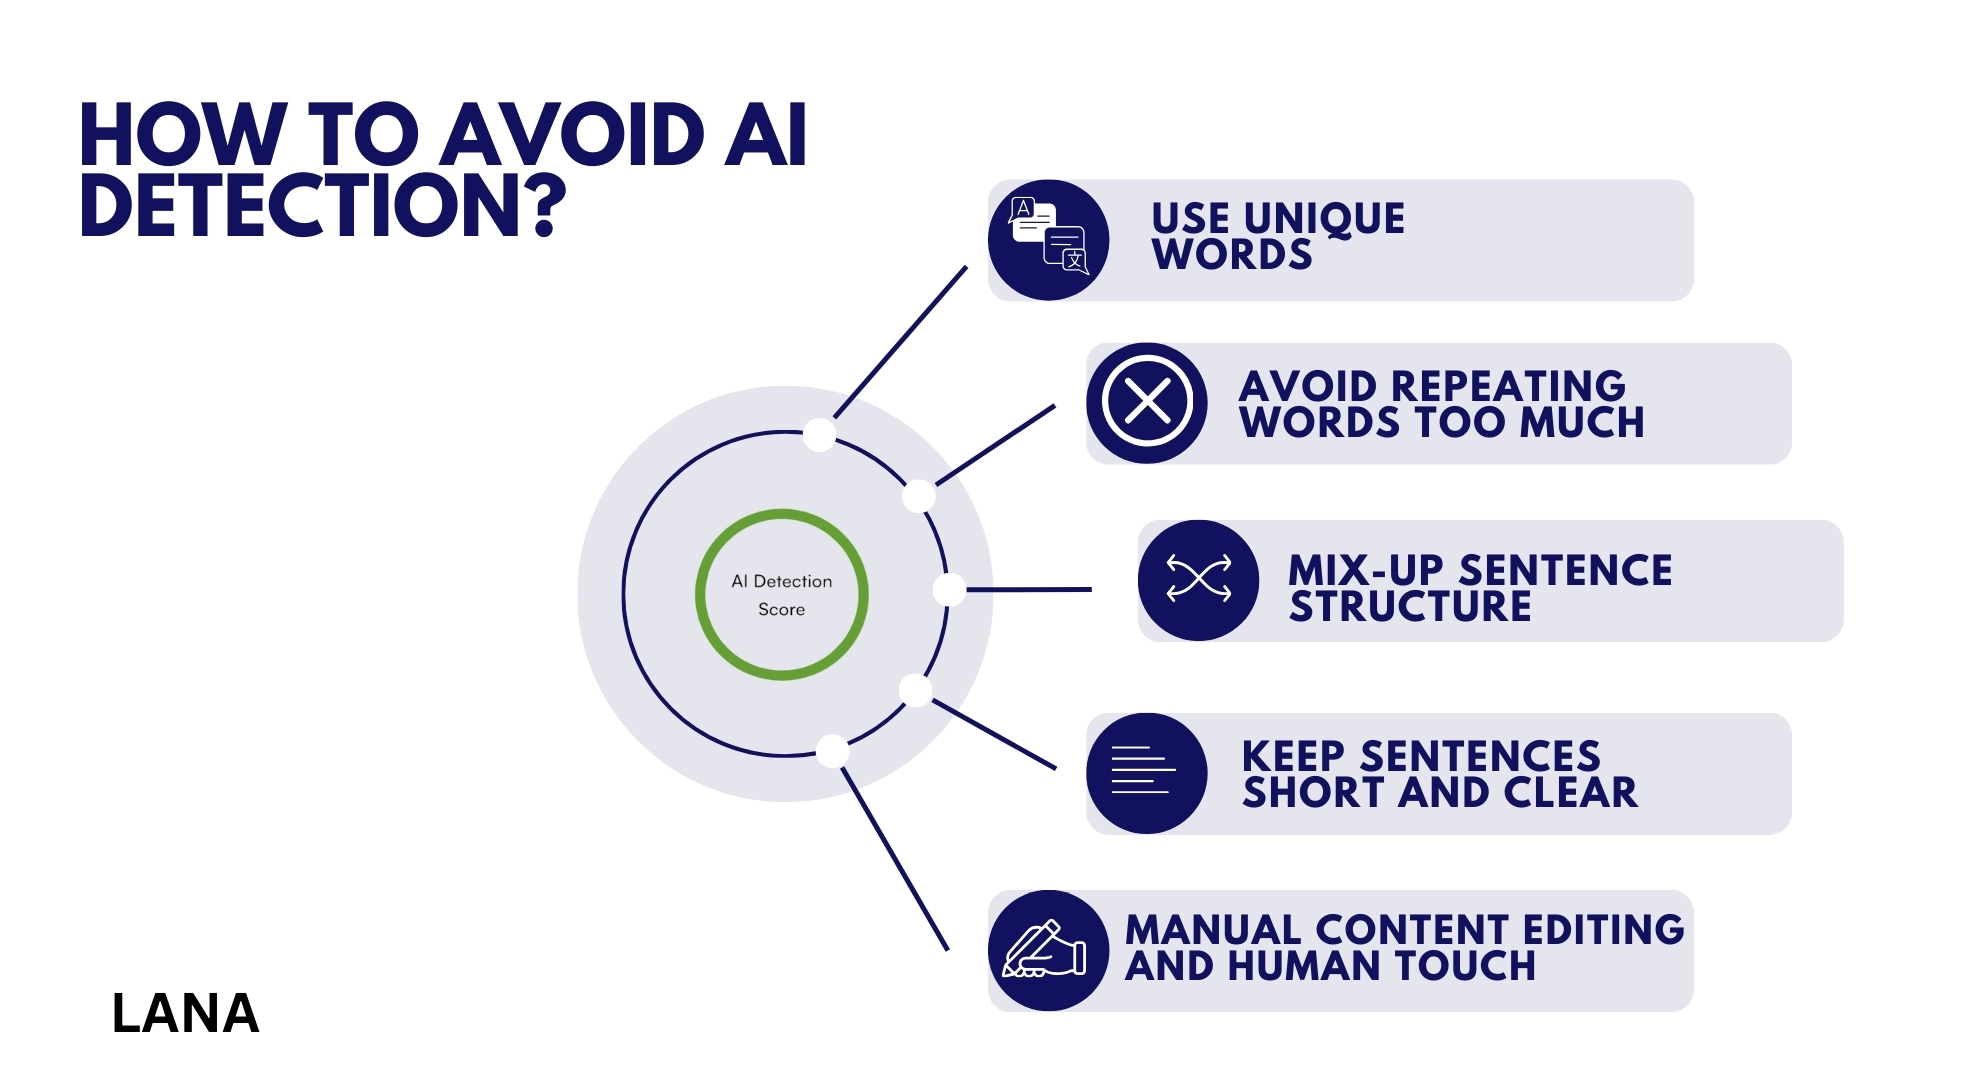 How to Avoid AI Detection